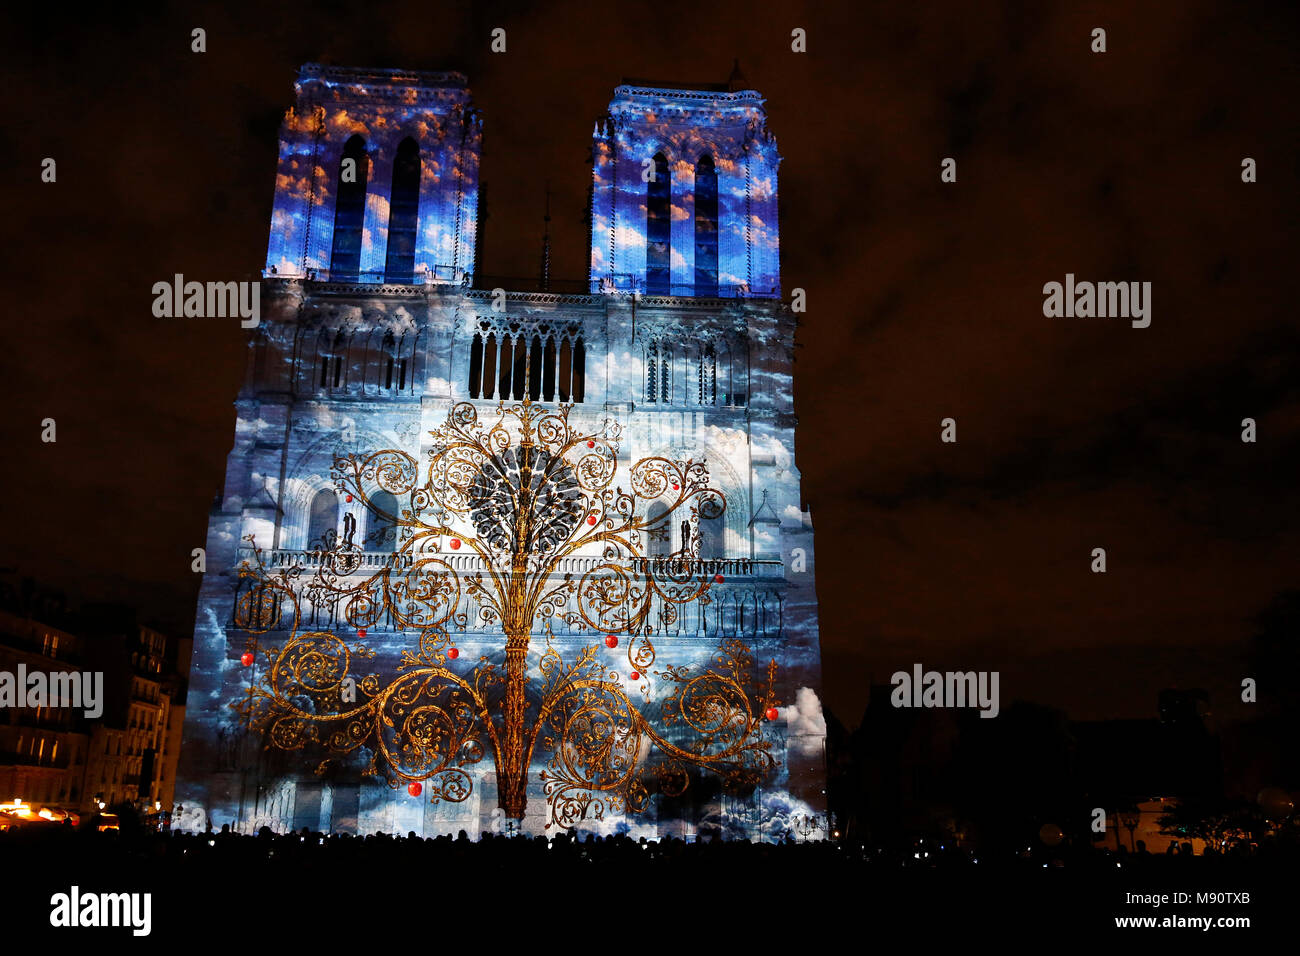 Sound and light show at Notre Dame de Paris cathedral, France. Stock Photo